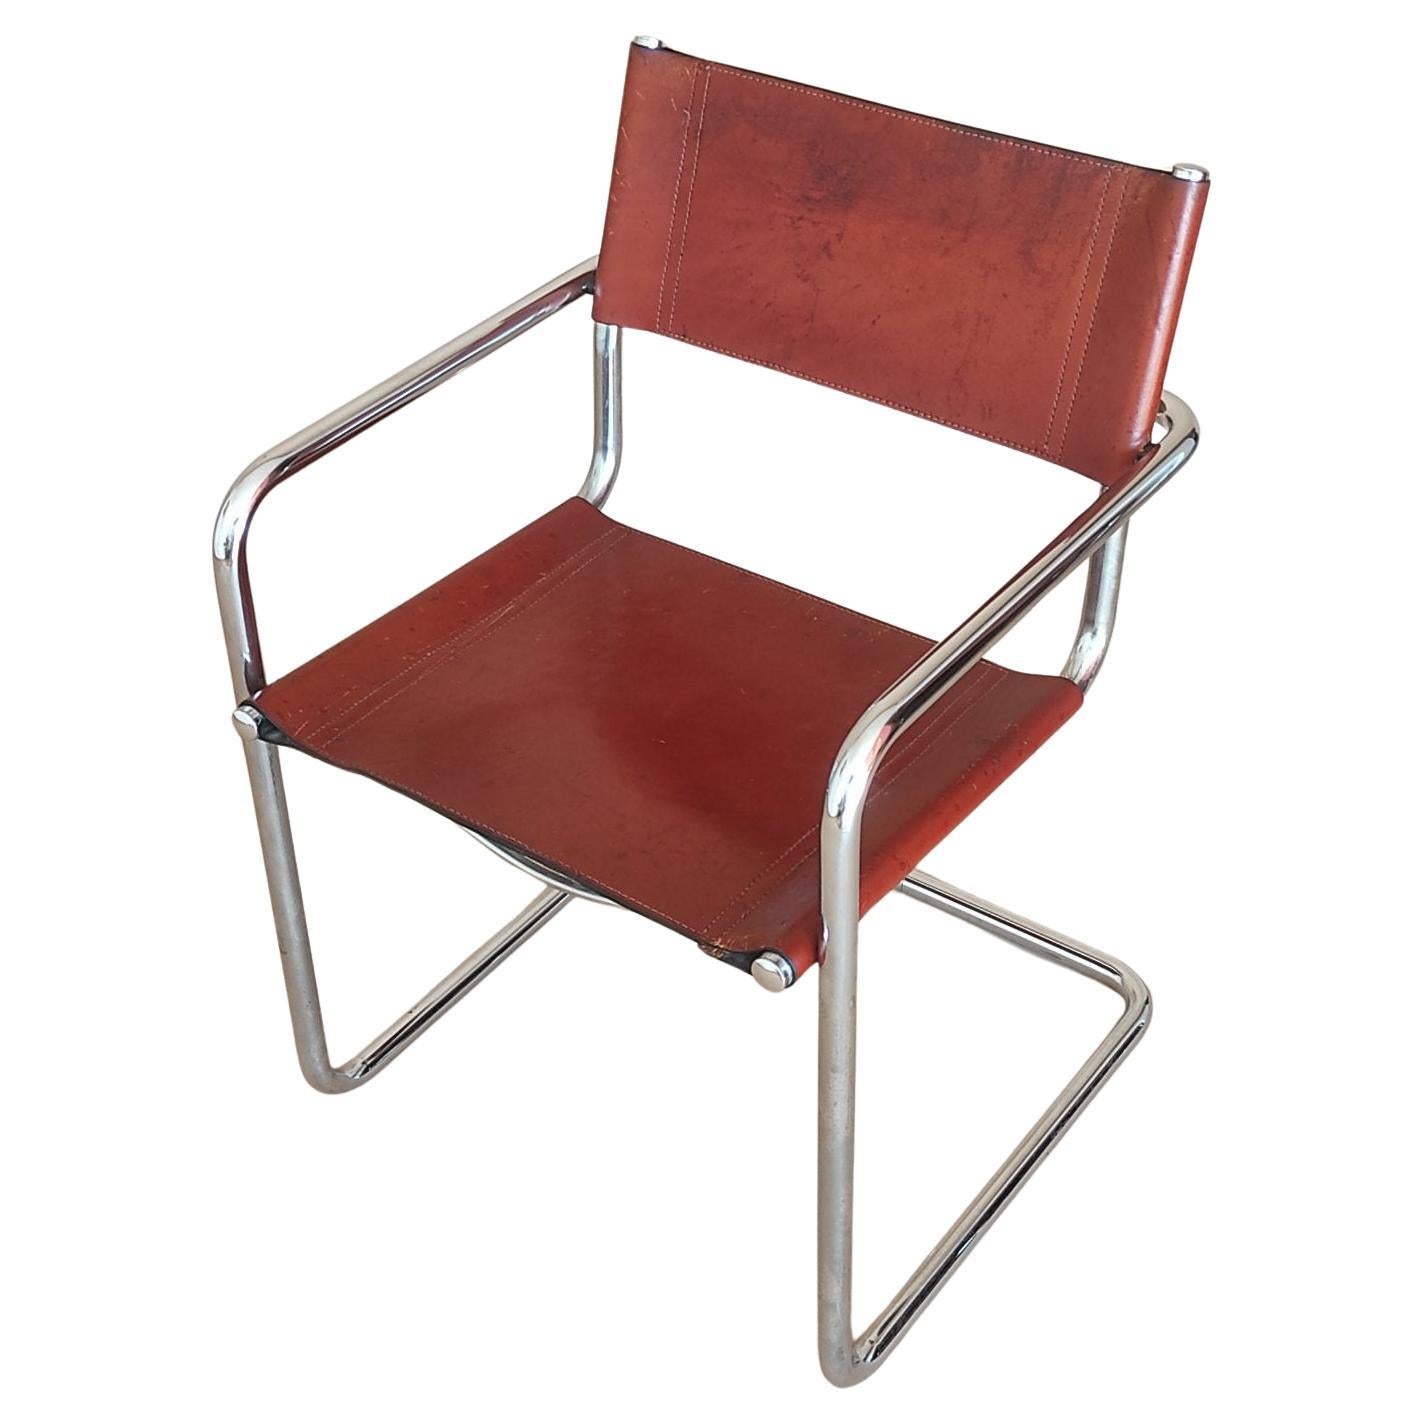 Titi Agnoli Cantilever Leather Chair for UNIFOR Italy 1970s For Sale